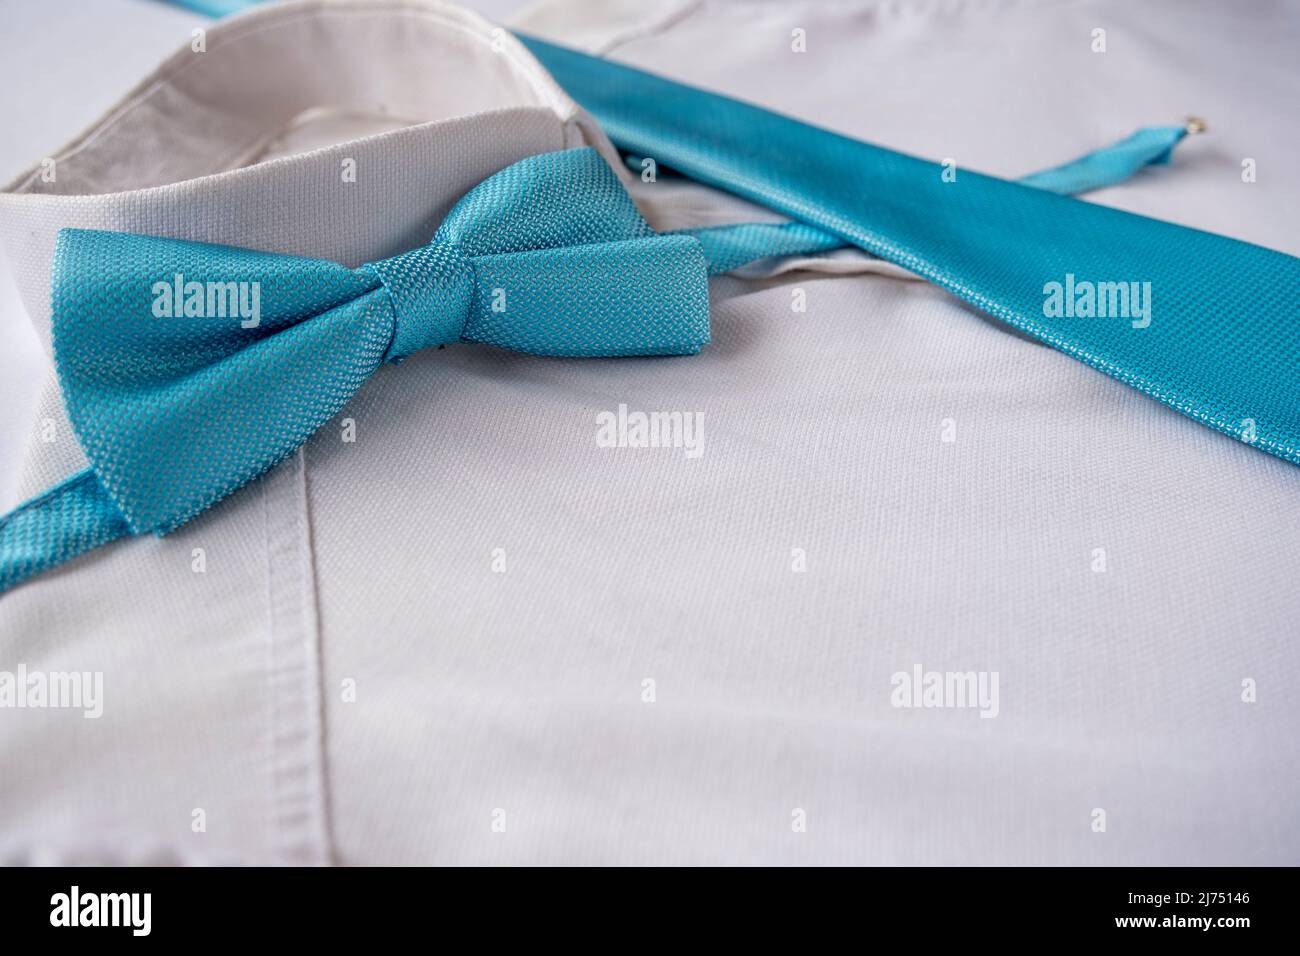 Blue tie and bow tie on white shirt, men fashion concept, blue color accessories,  men clothing idea, sitting view Stock Photo